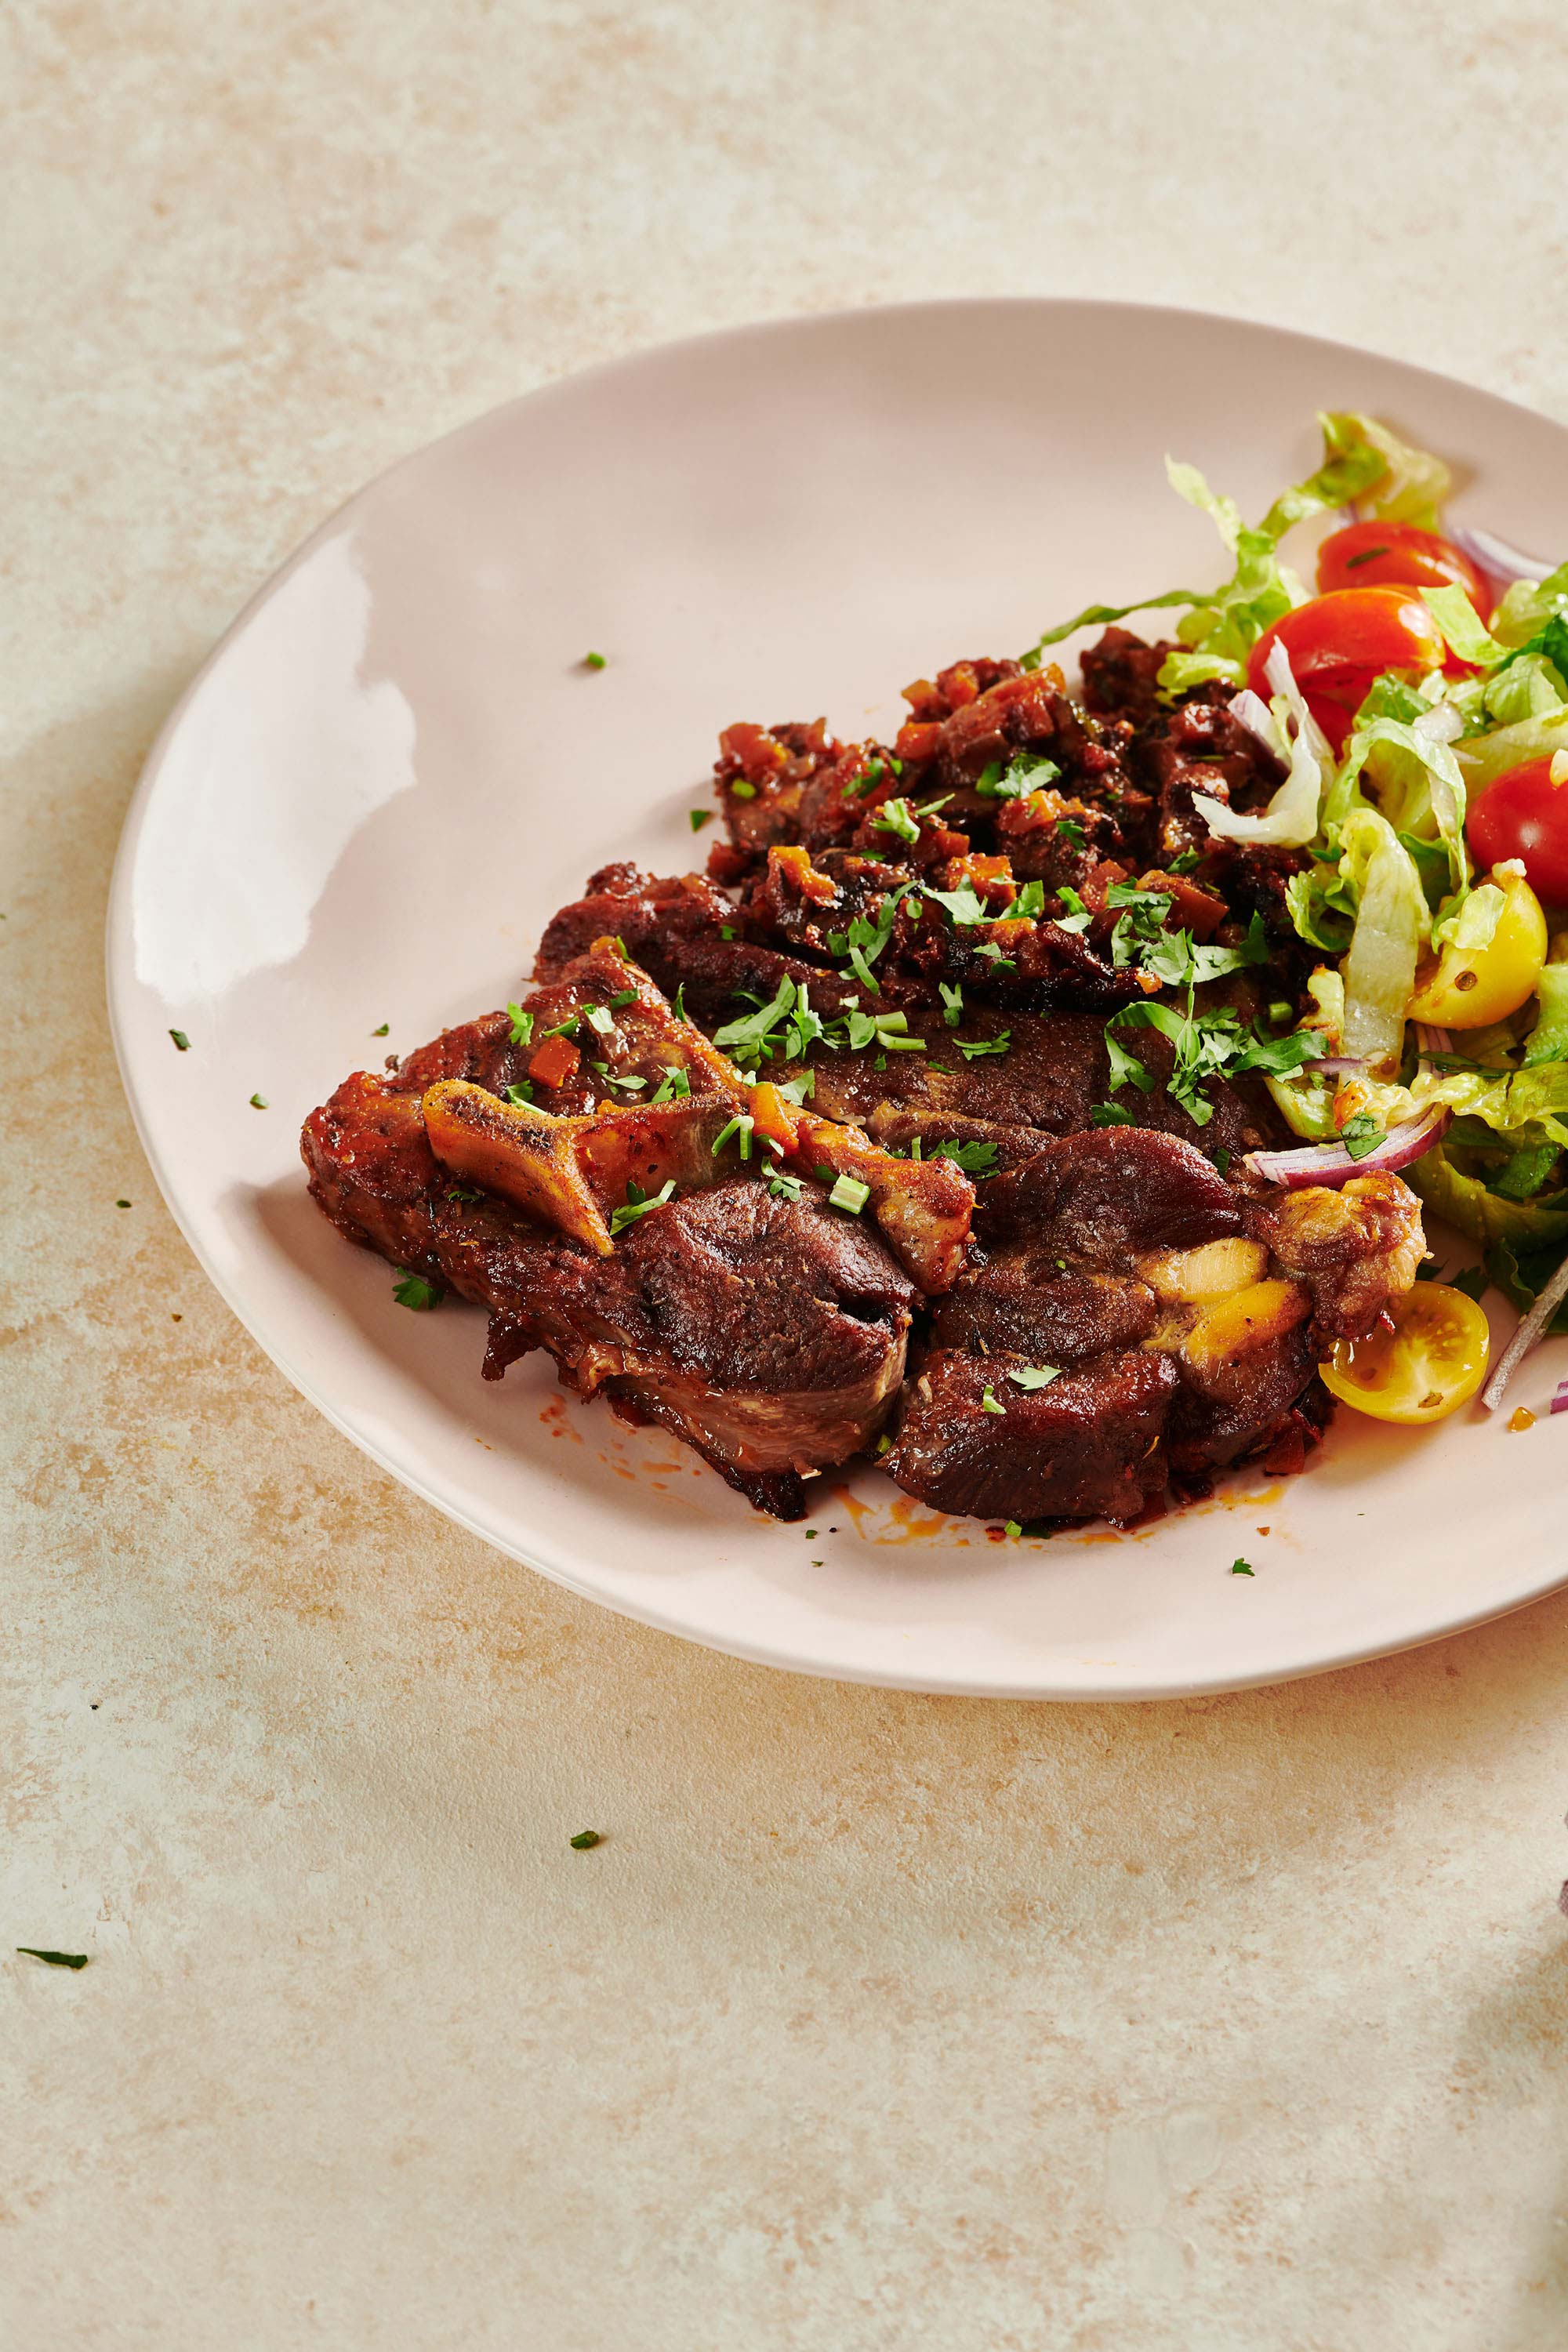 Plate of Braised Lamb Shoulder Chops and salad.